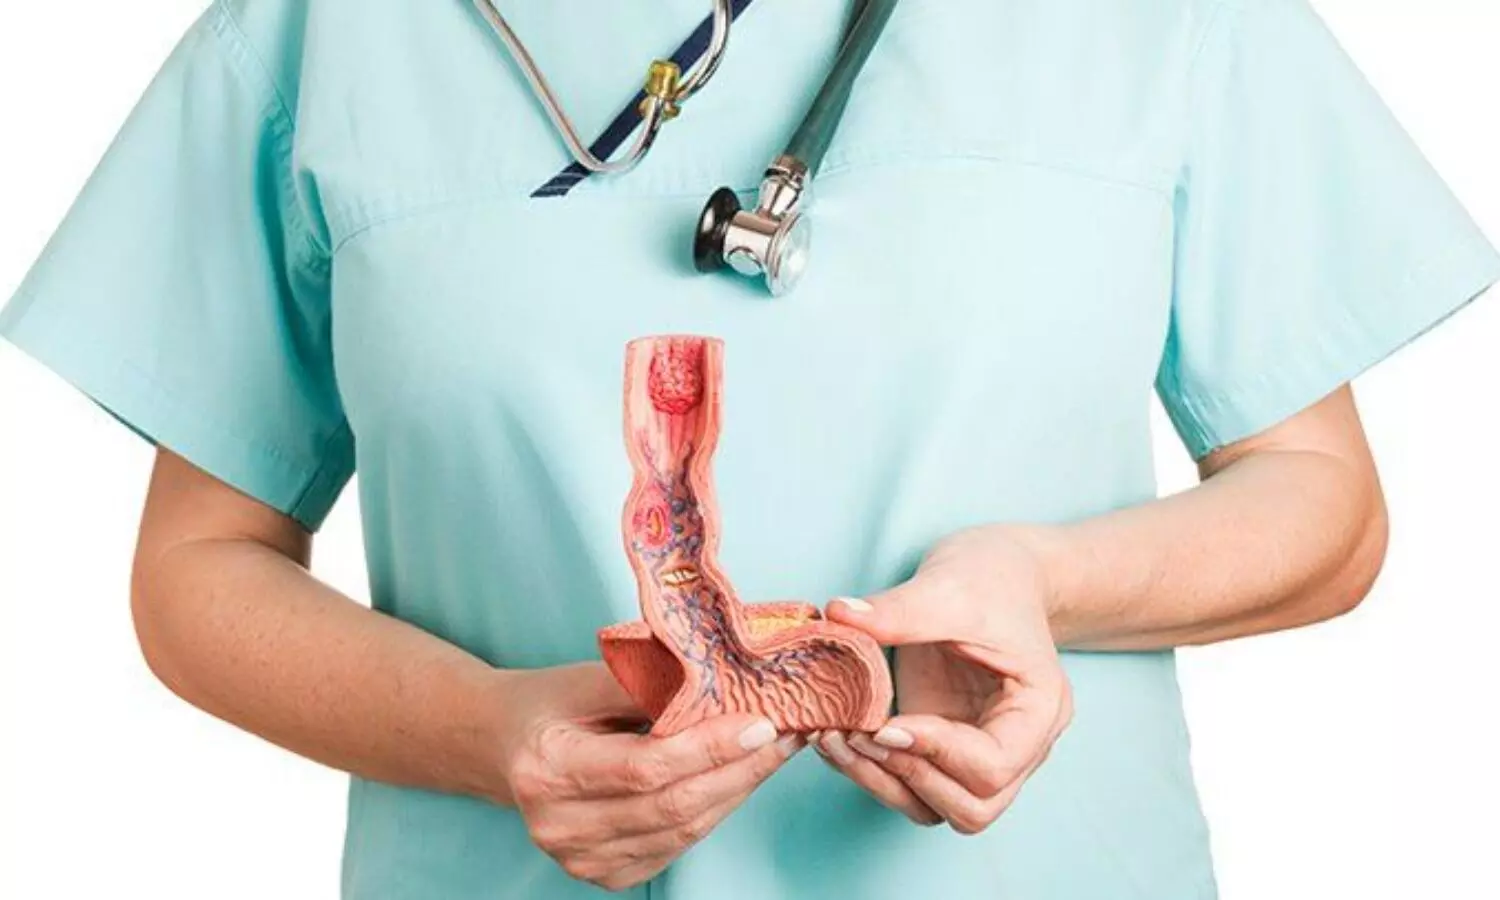 New prediction model helps stratify death risk after esophagectomy for cancer: Study